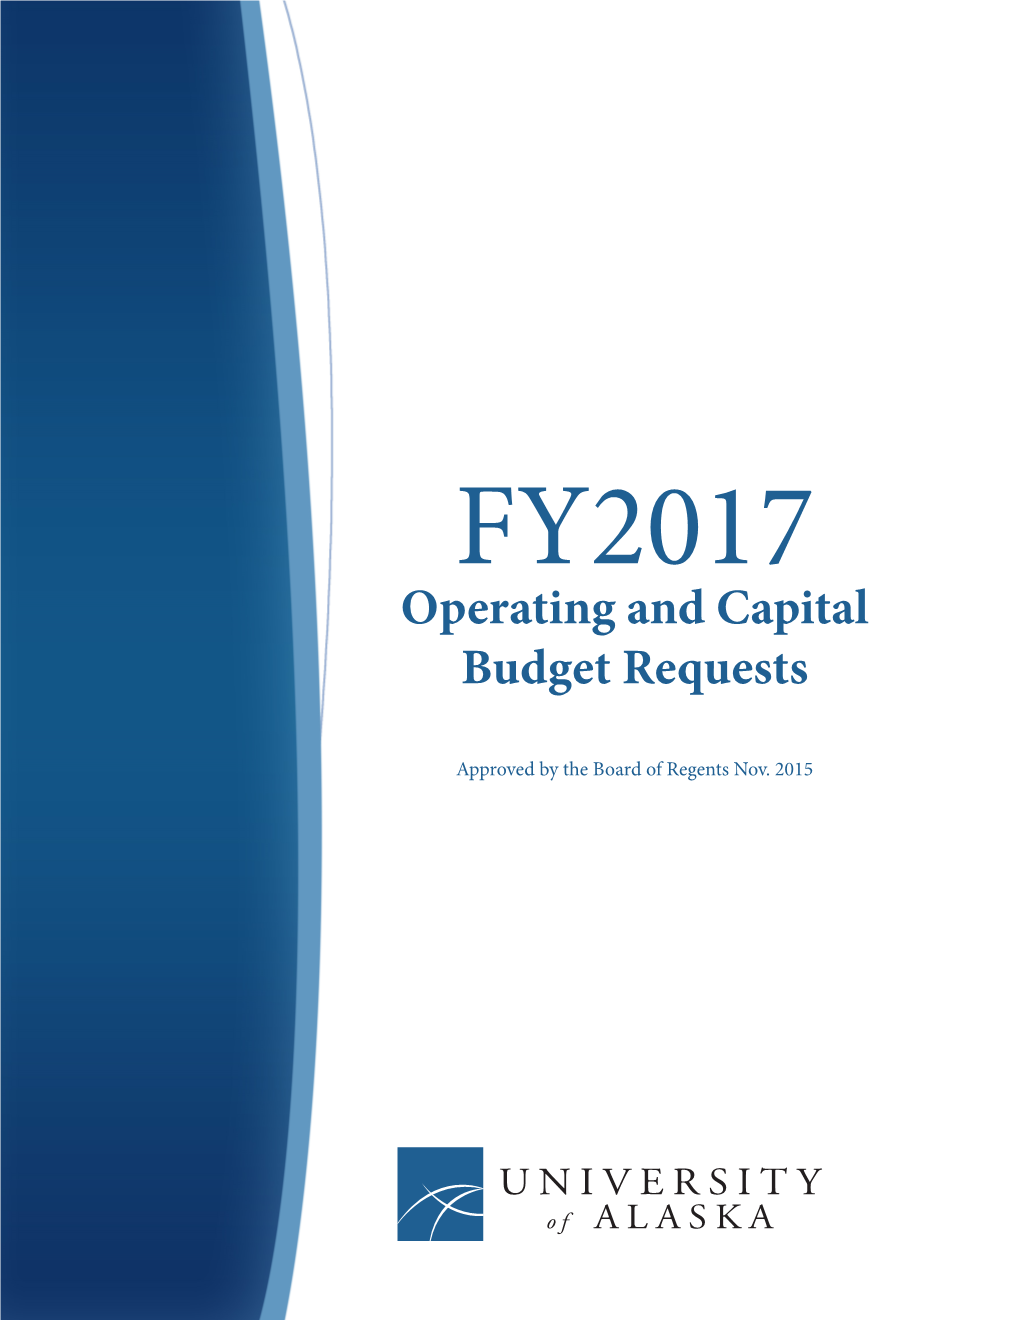 FY17 Operating and Capital Budget Requests